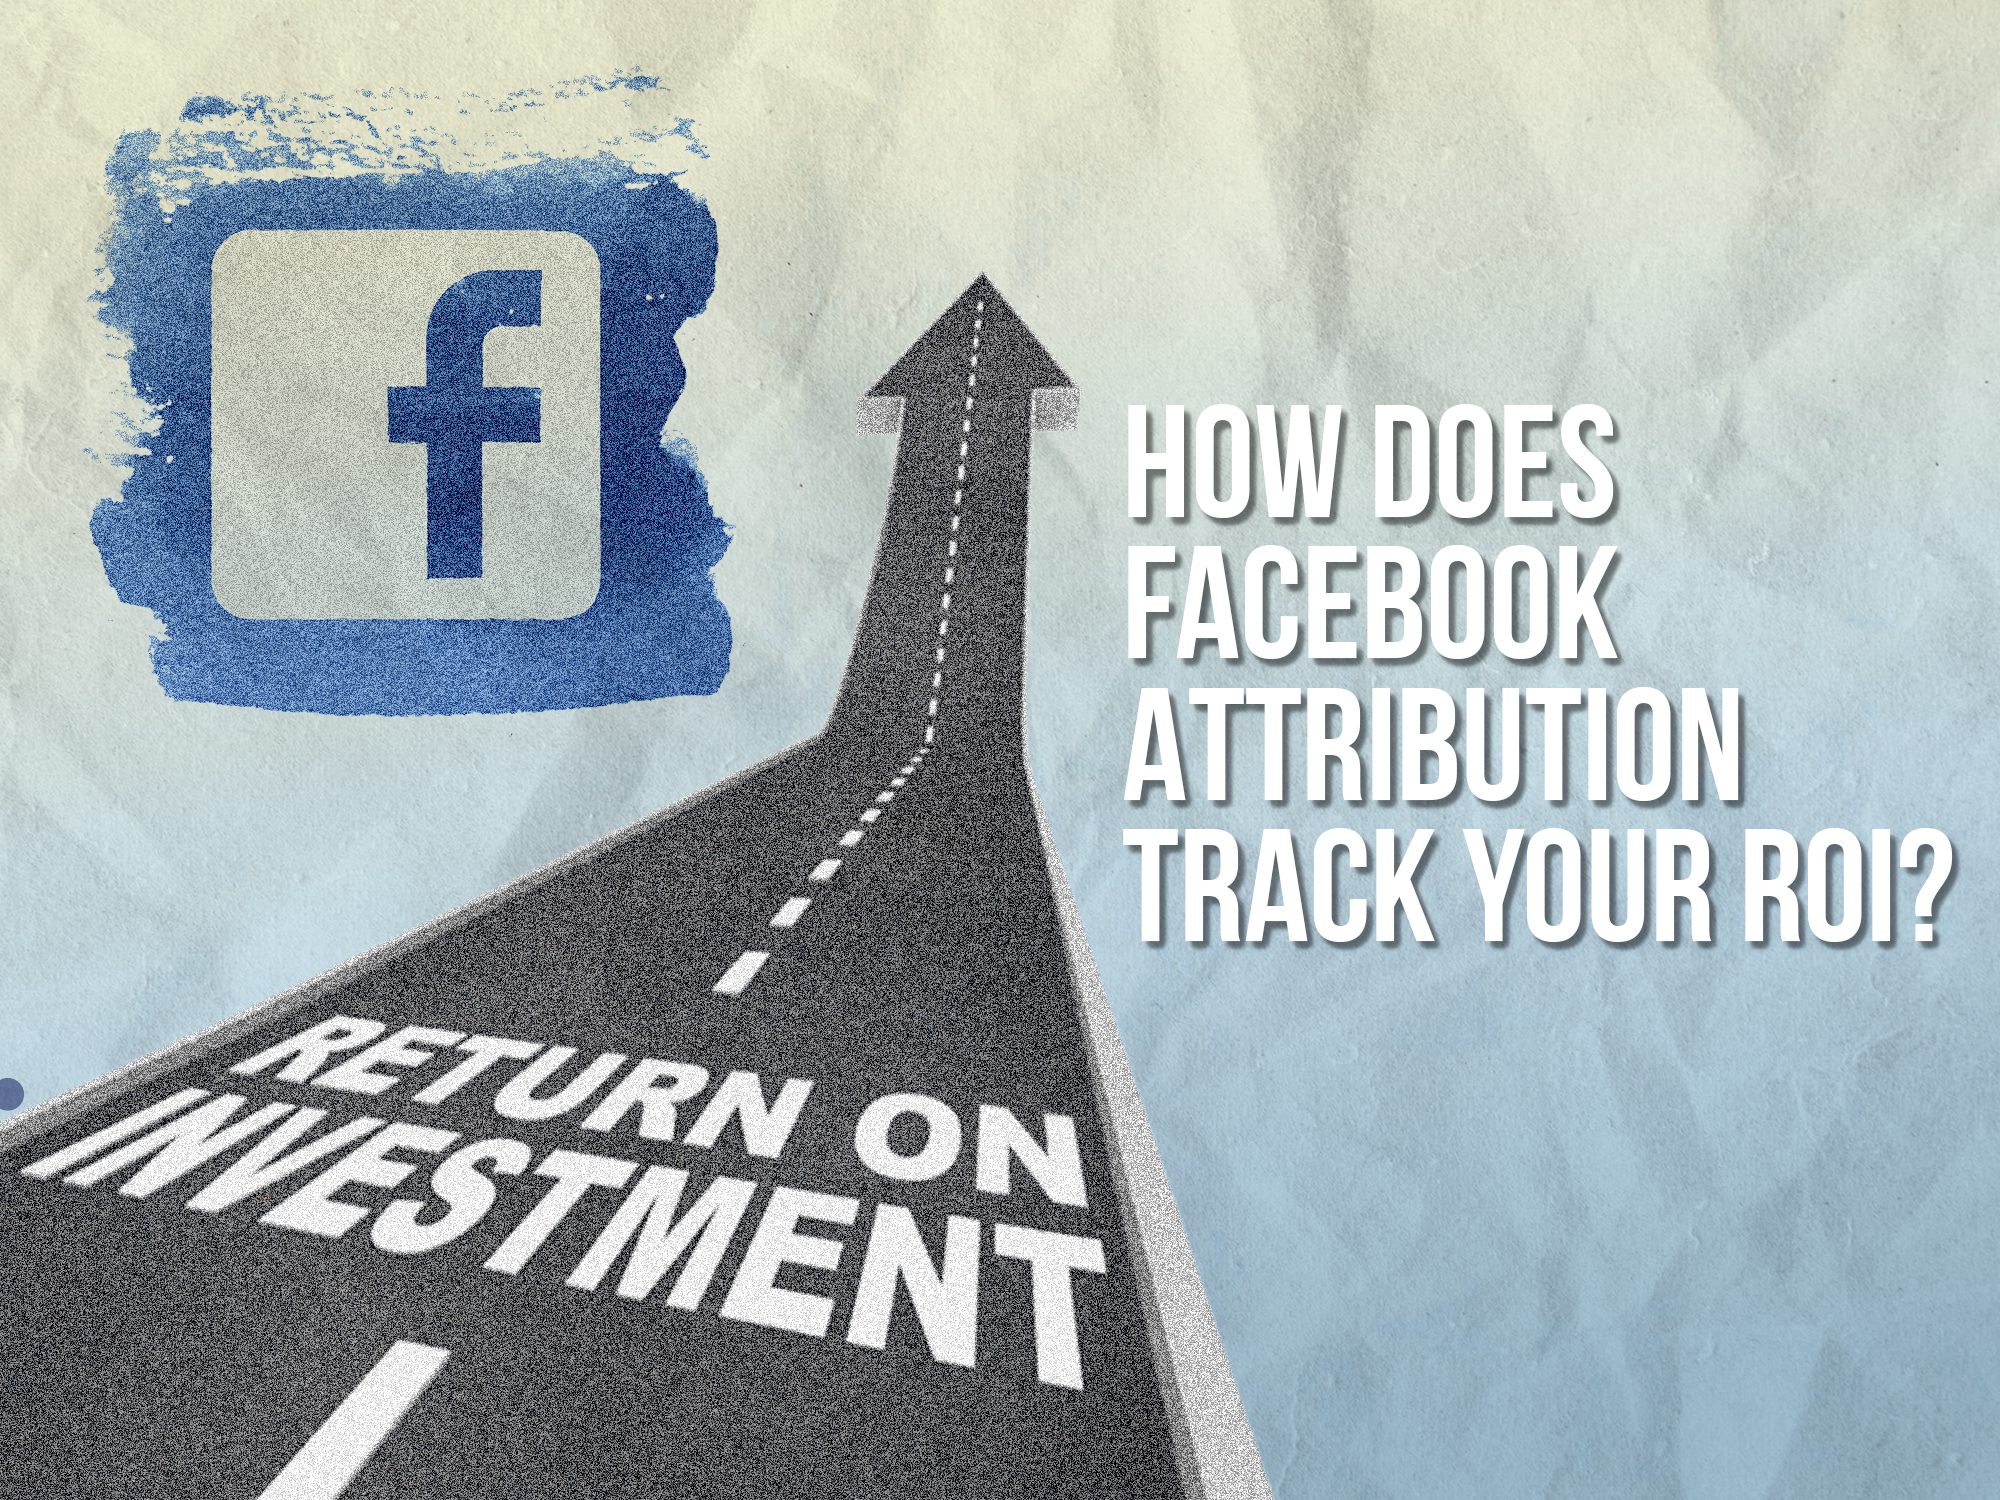 How Does Facebook Attribution Track Your ROI?